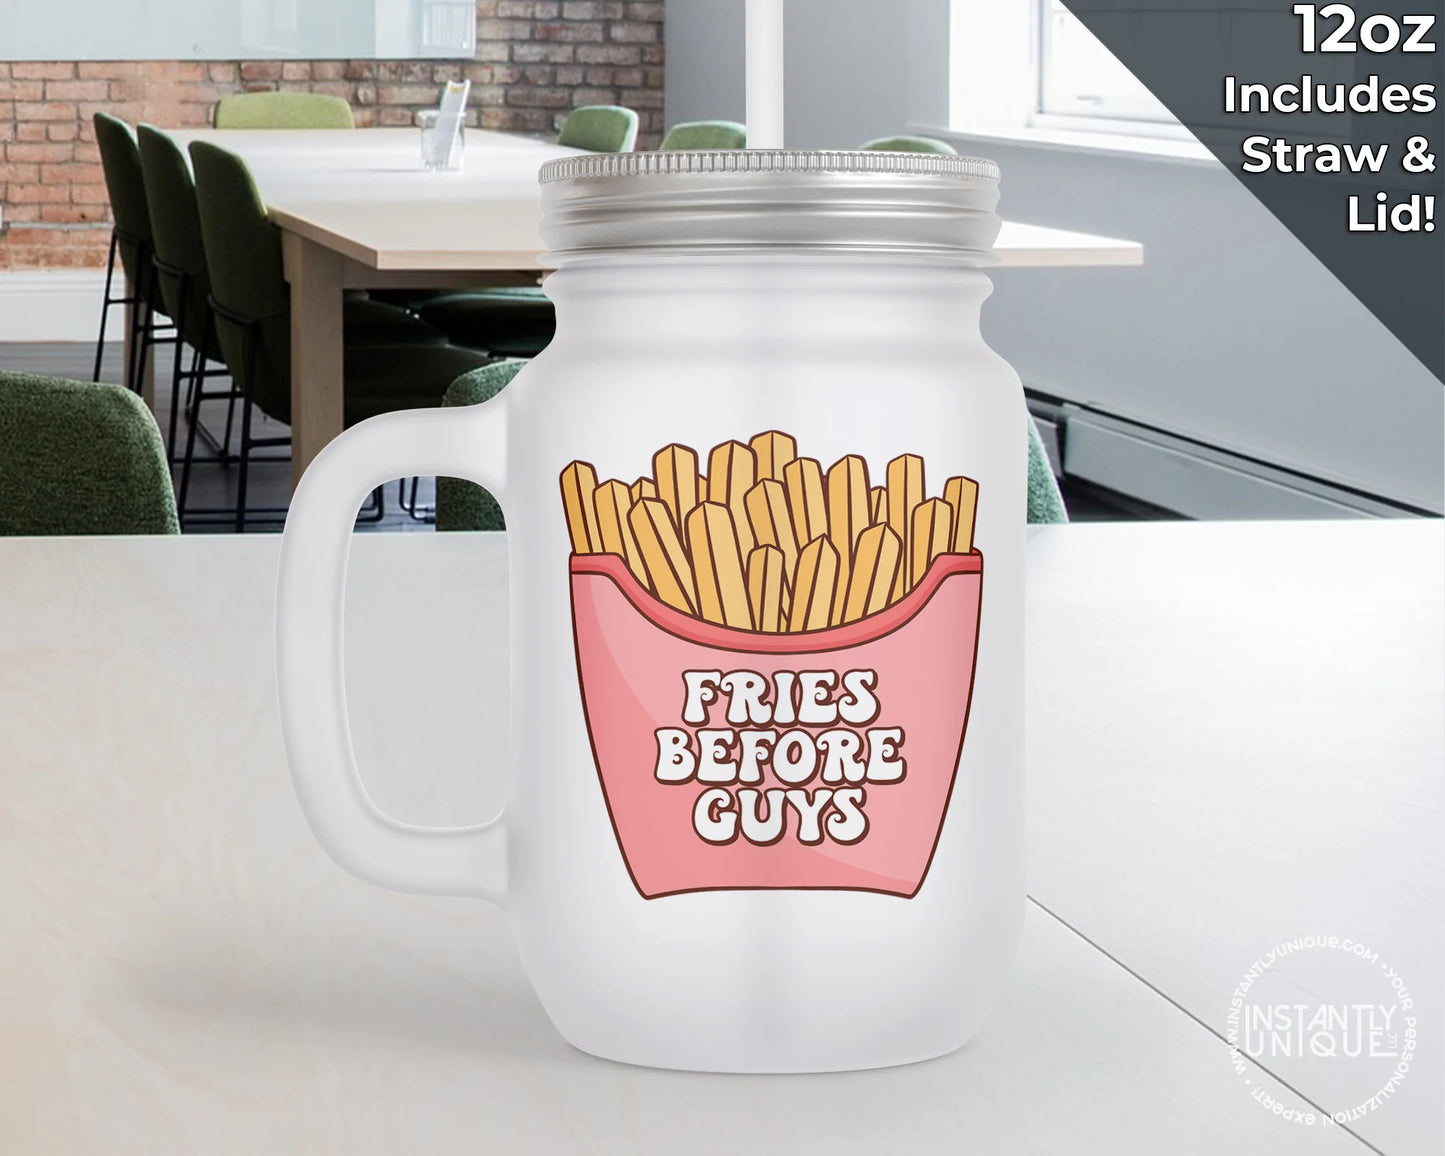 Fries Before Guys Design - 12oz Frosted Glass Mason Jar with Lid and Straw